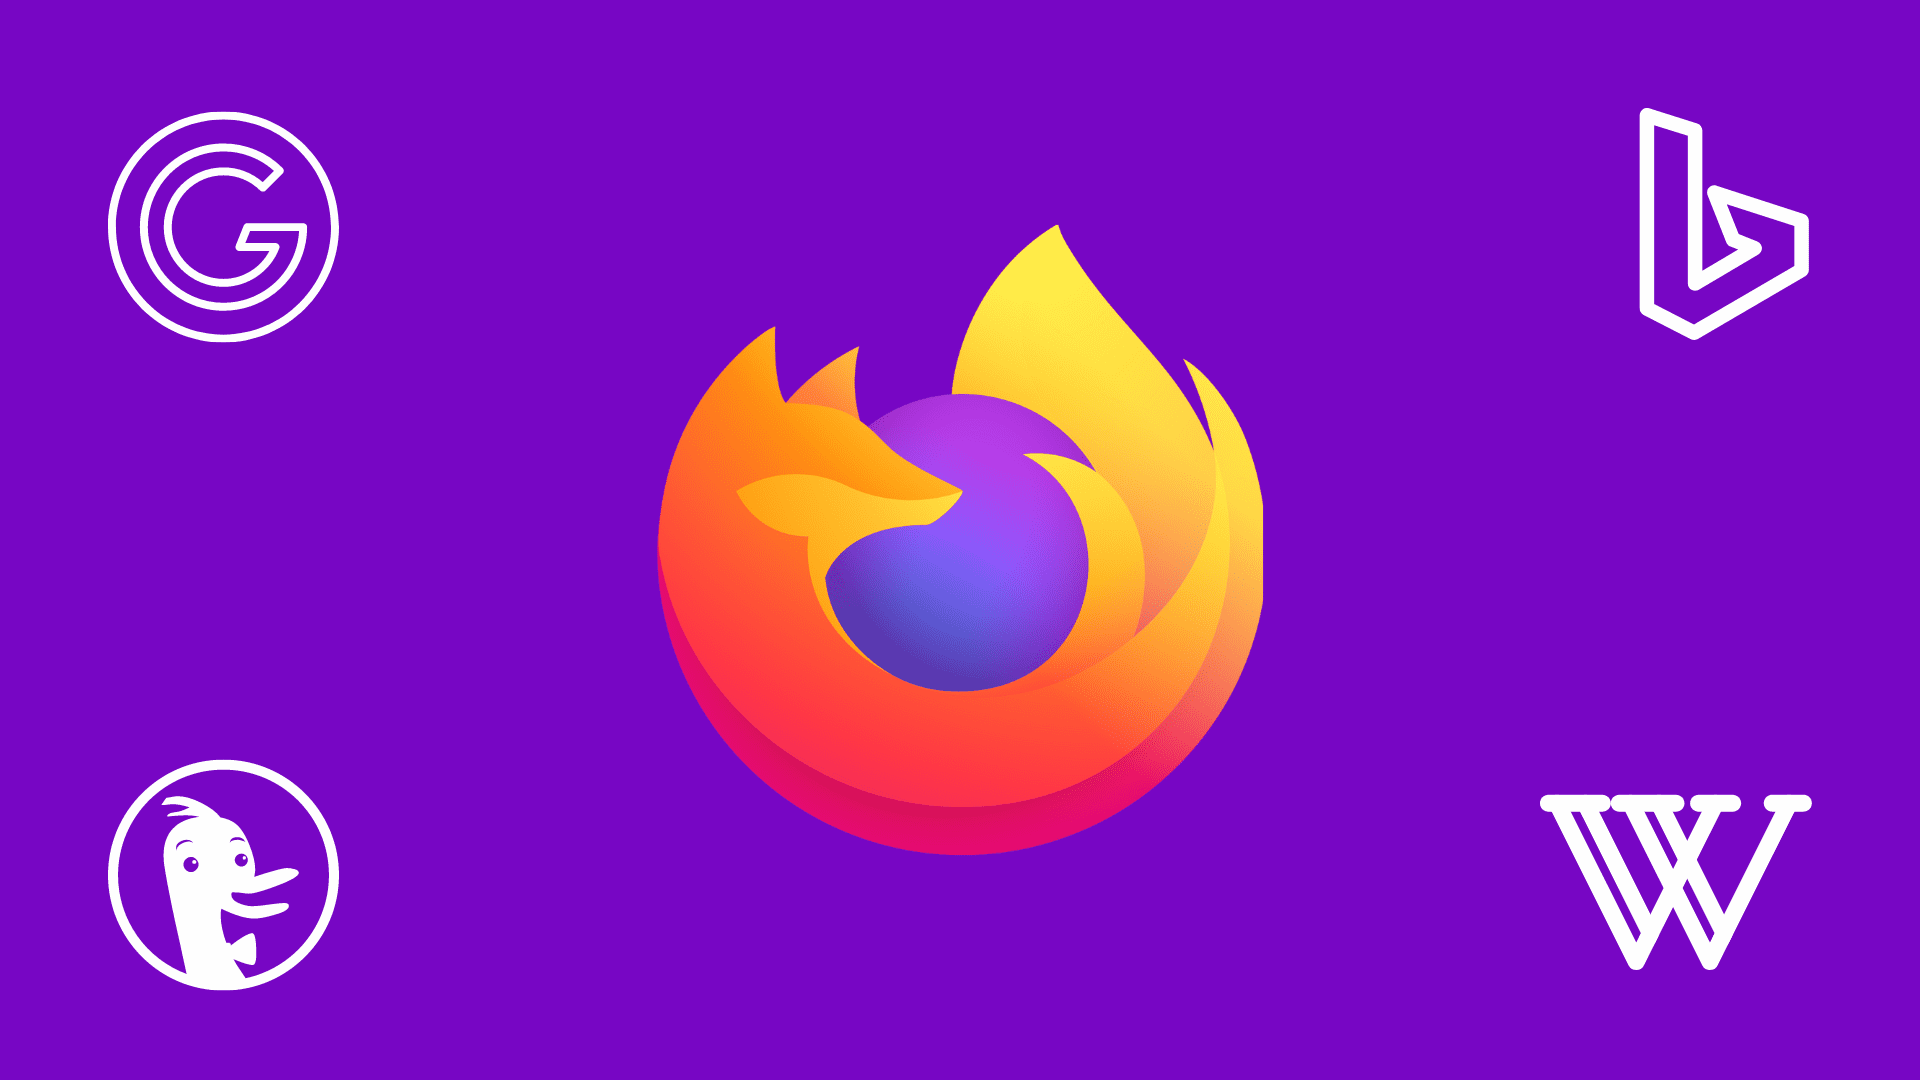 Firefox icon with Google, Bing, DuckDuckGo, and Wikipedia search engine logos